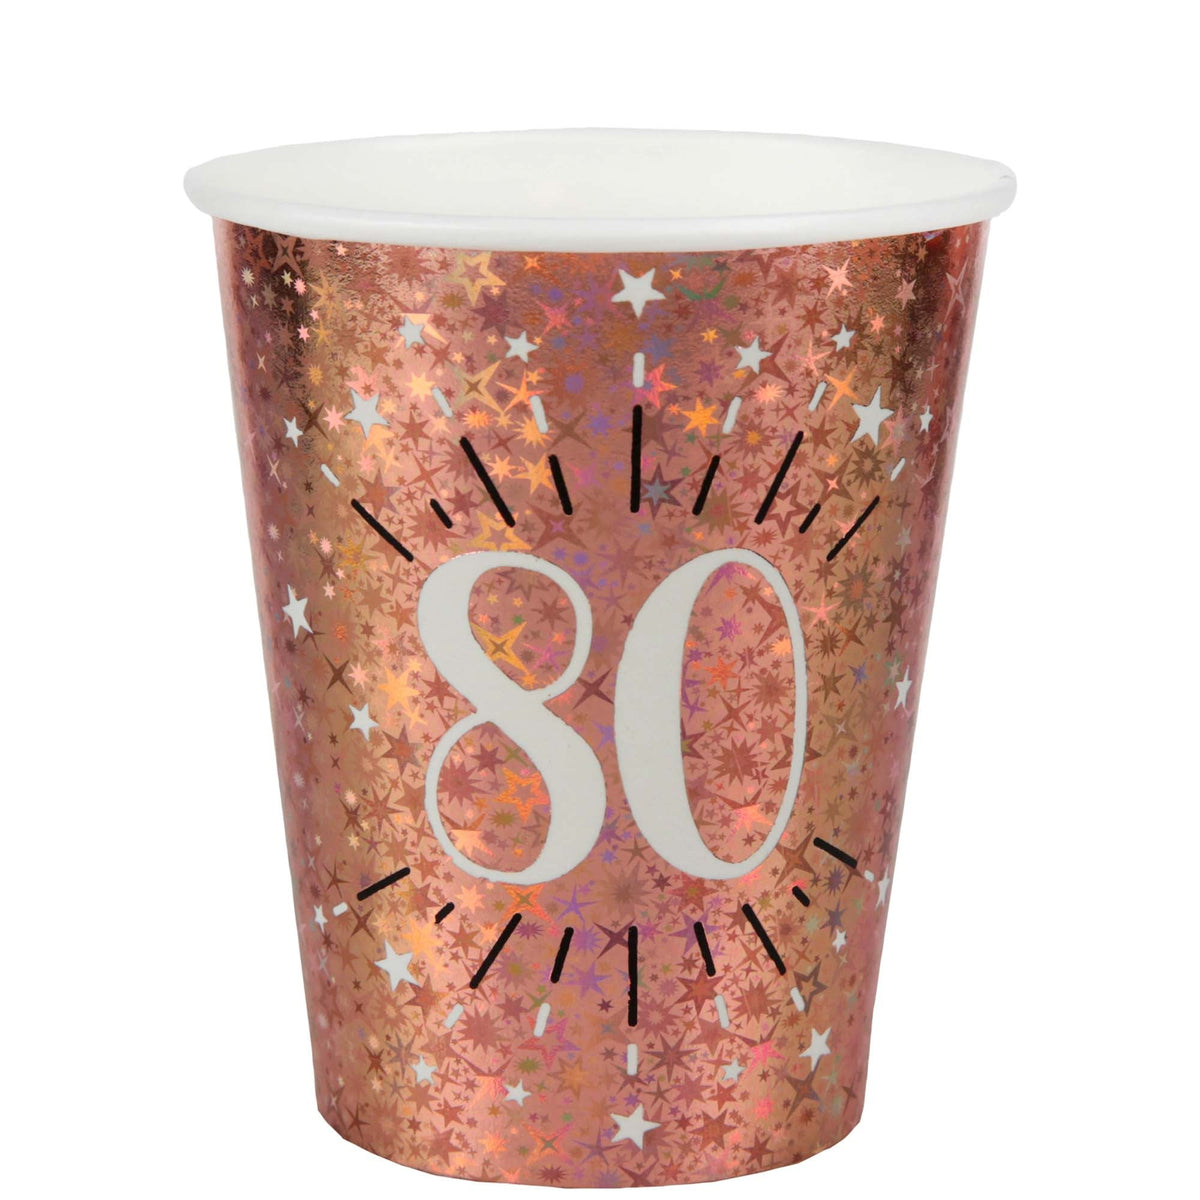 SANTEX Age Specific Birthday Rose Gold 80th Birthday Party Paper Cups, 9 Oz, 10 Count 3660380069973